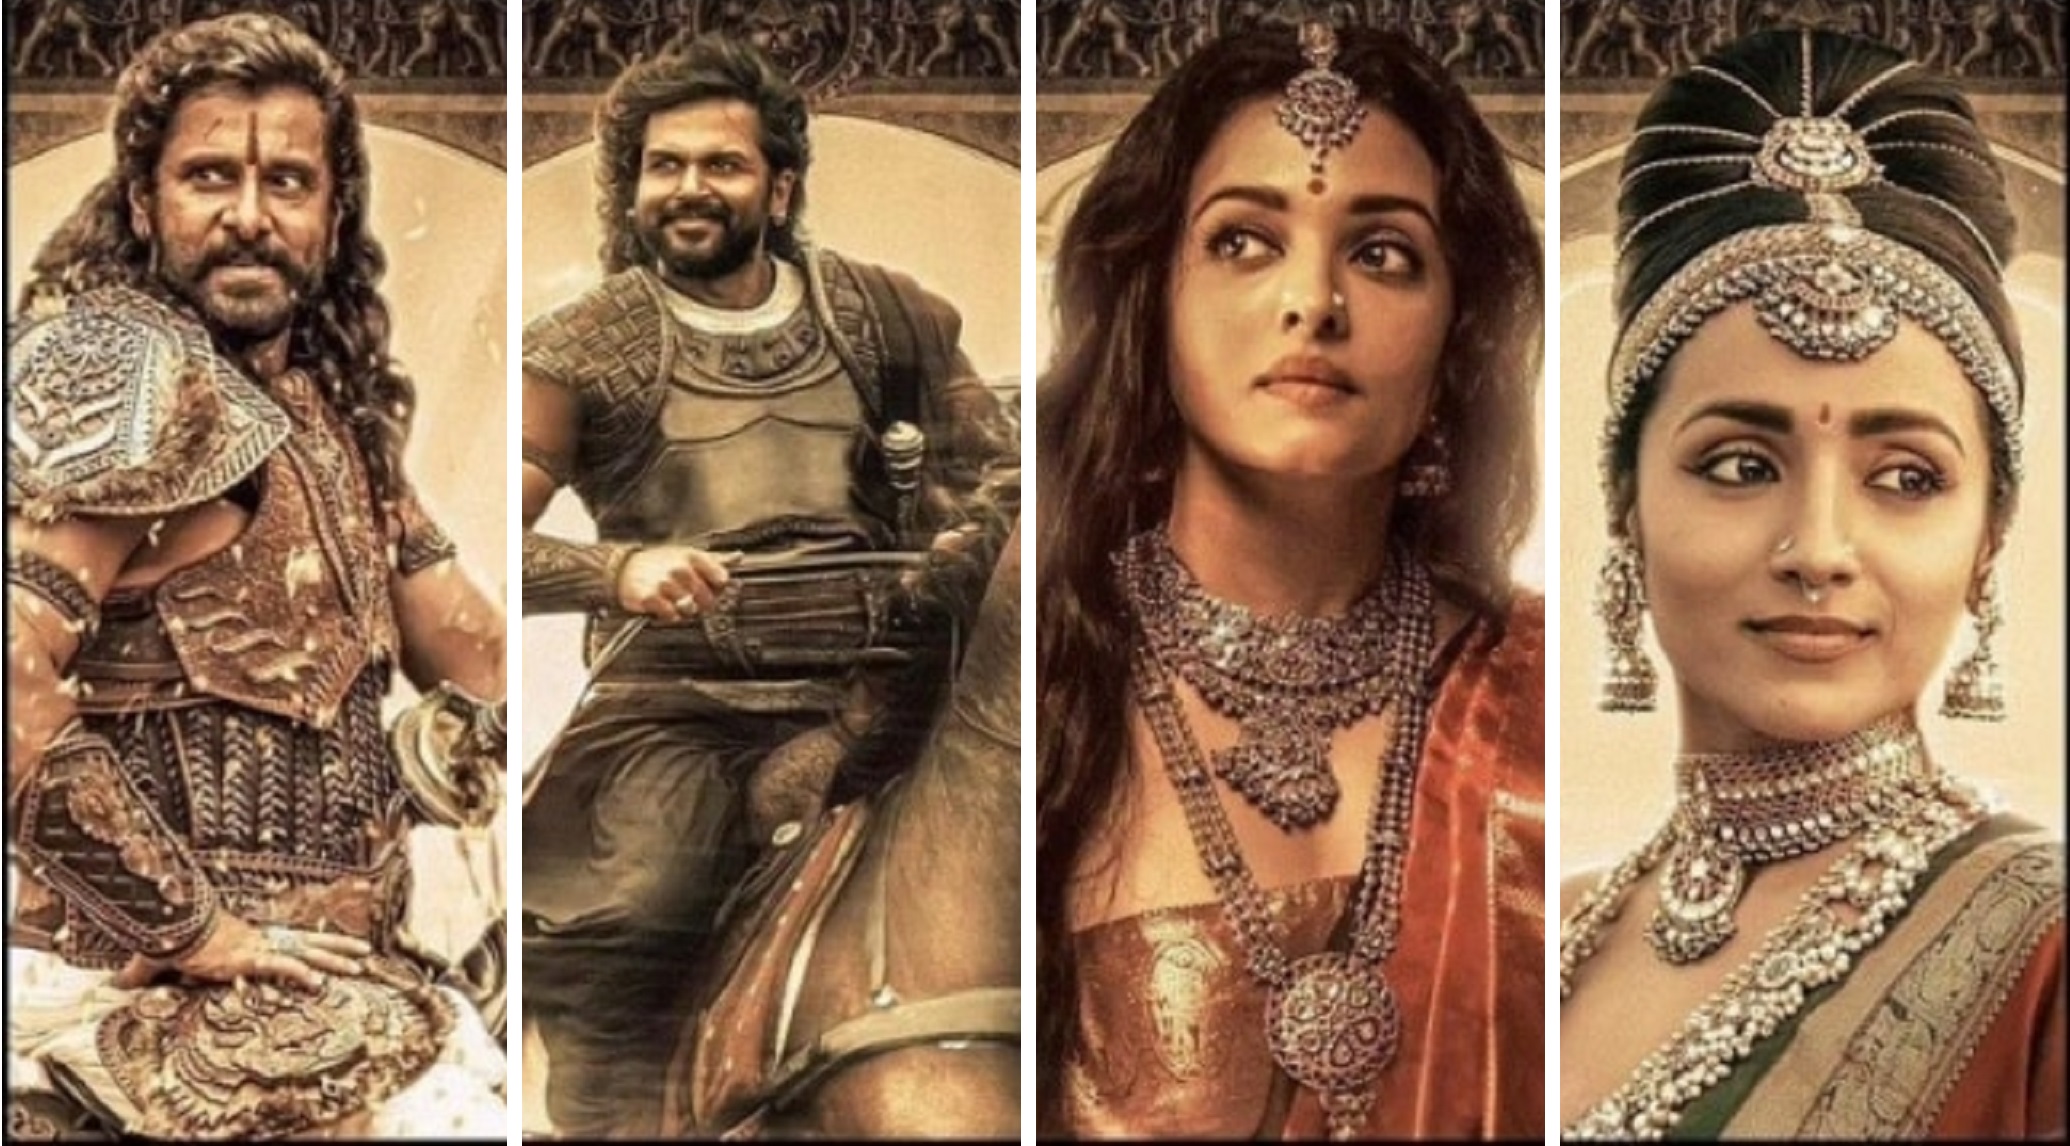 The Much Awaited Ponniyin Selvan Trailer Is Here And Fans Are Calling It ‘Bigger Than Baahubali’